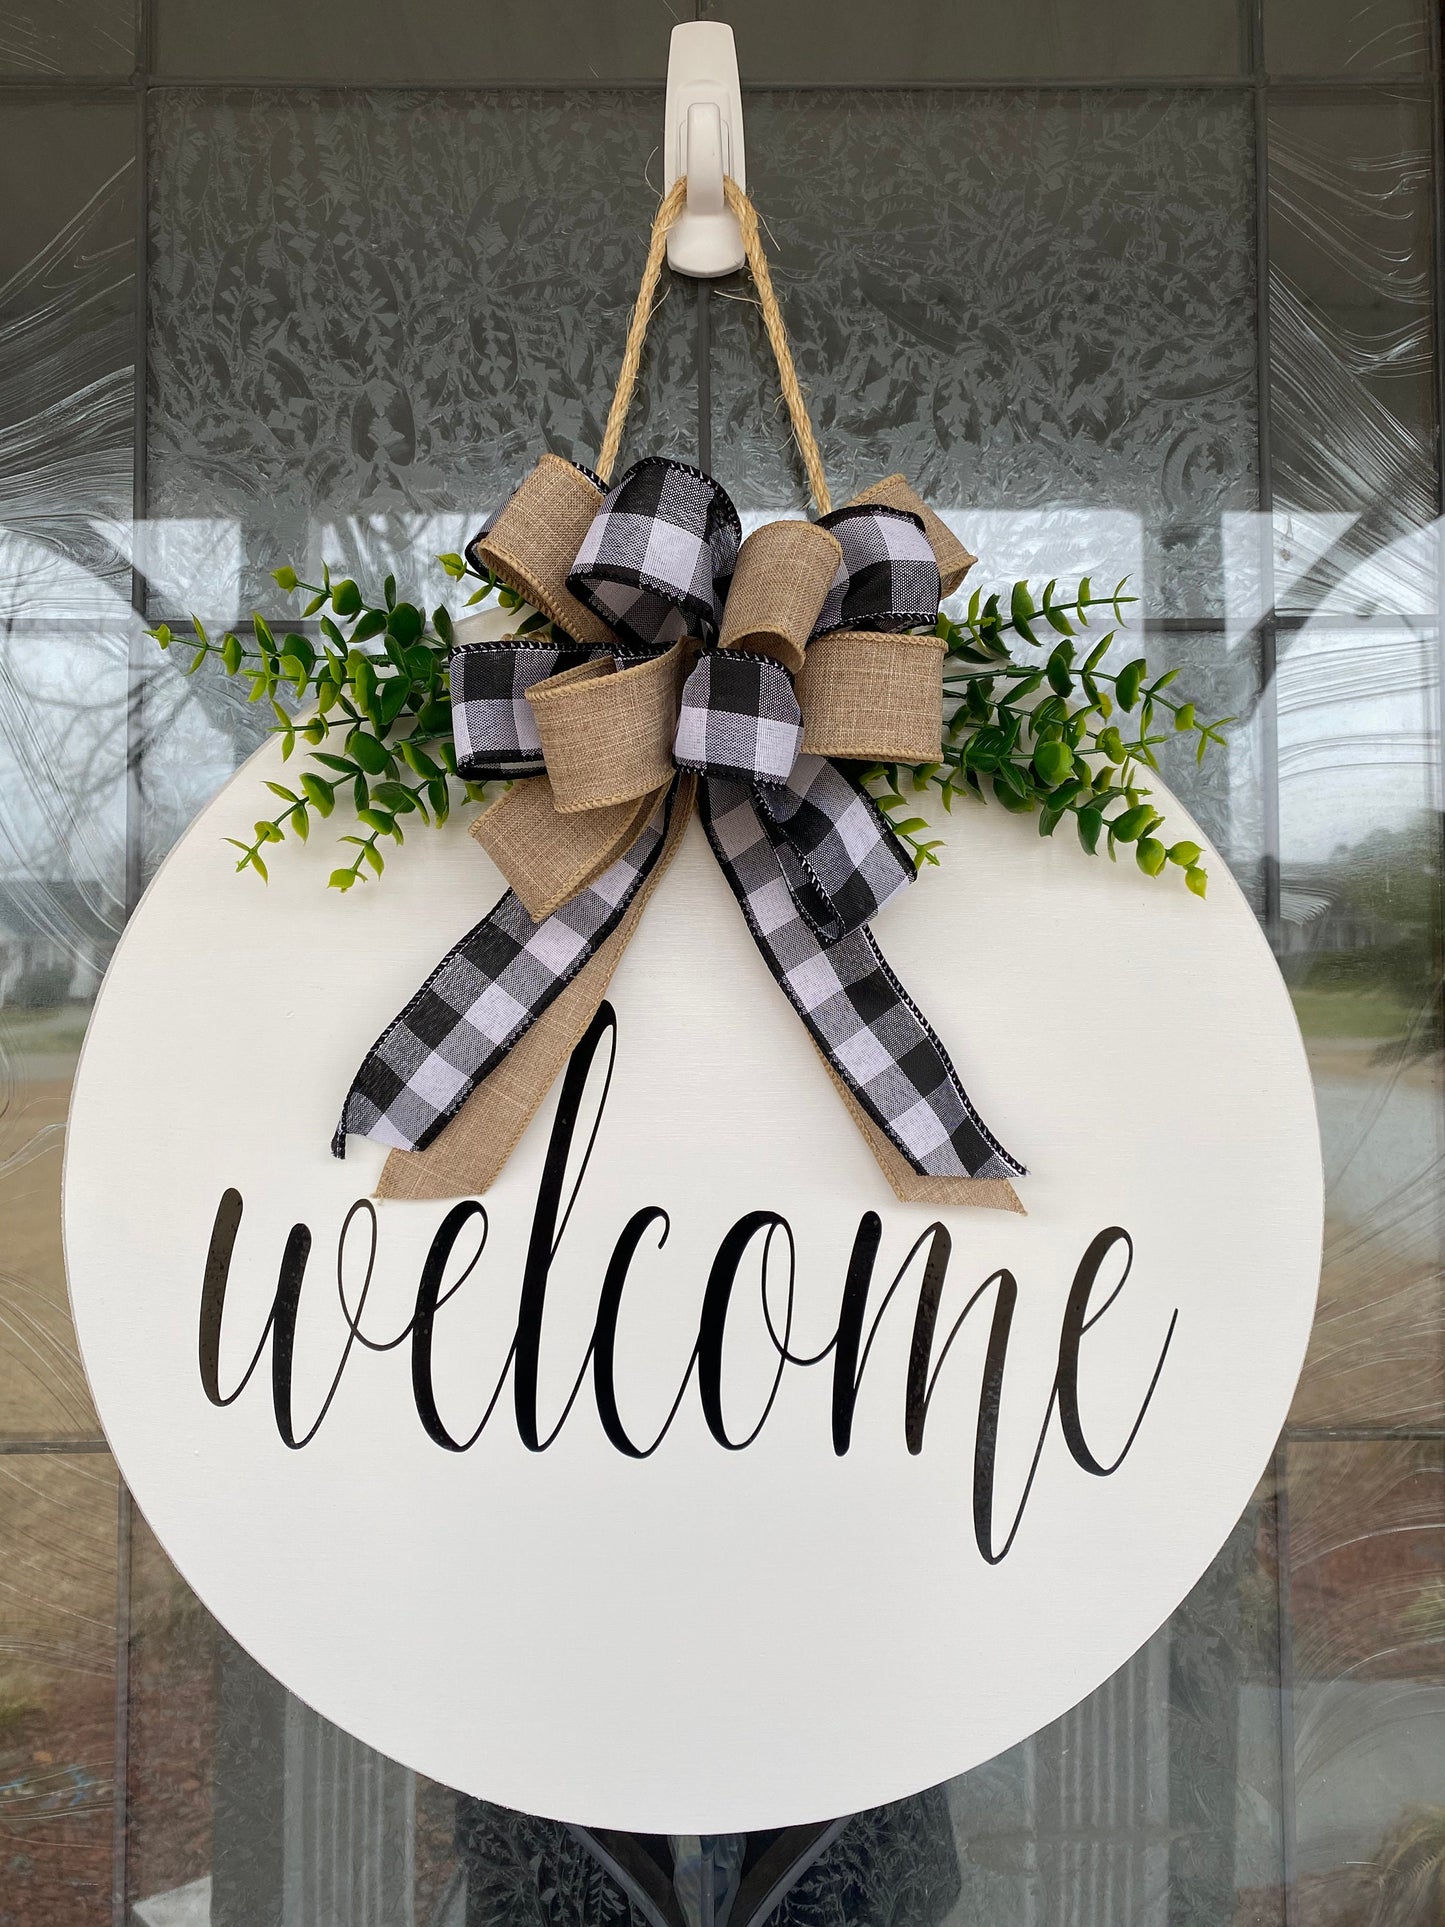 White Welcome Sign